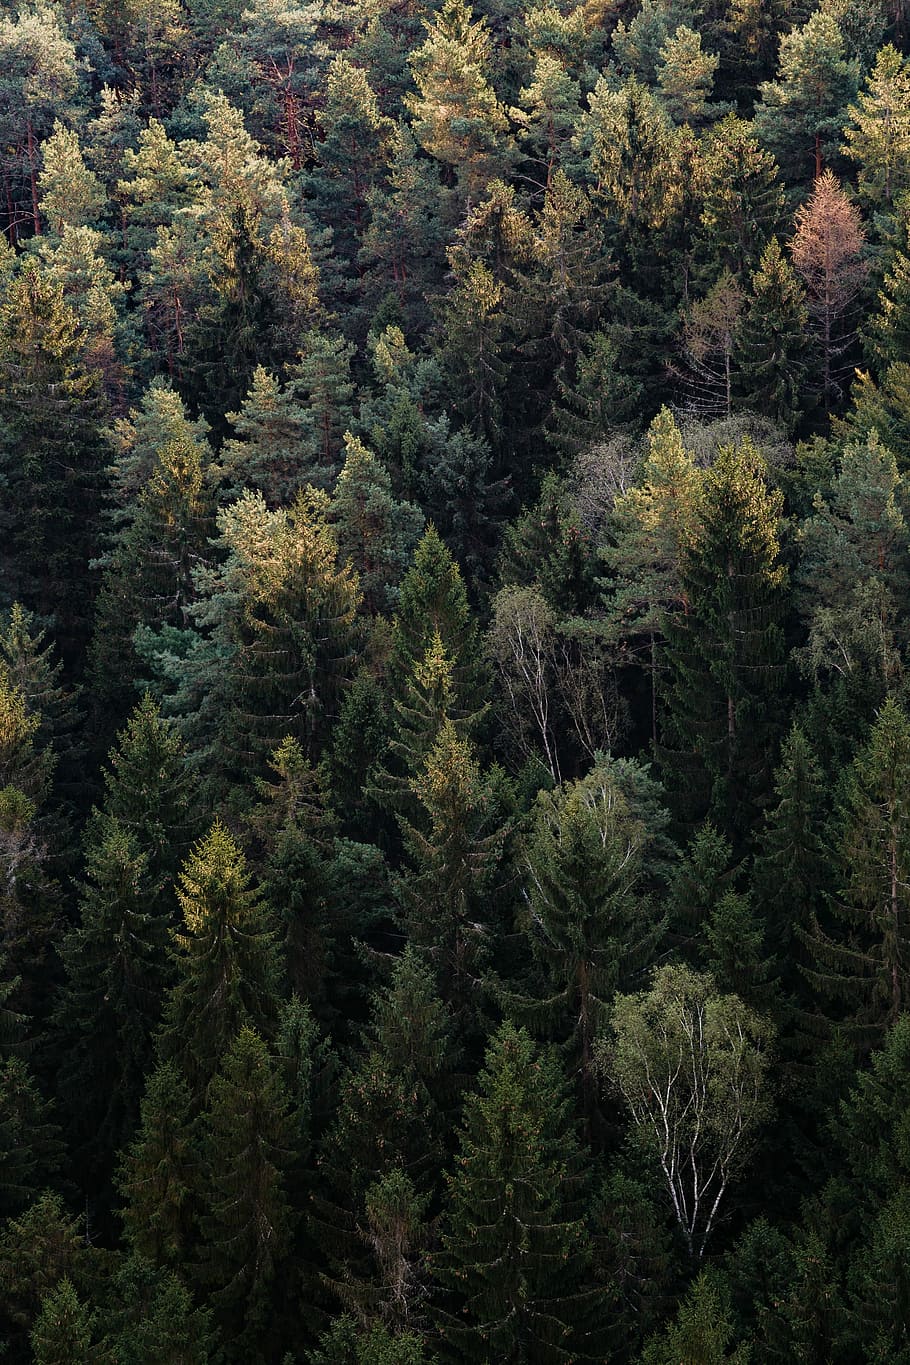 green, forest field, daytime, autumn, black, forest, gray, pines, trees, wood